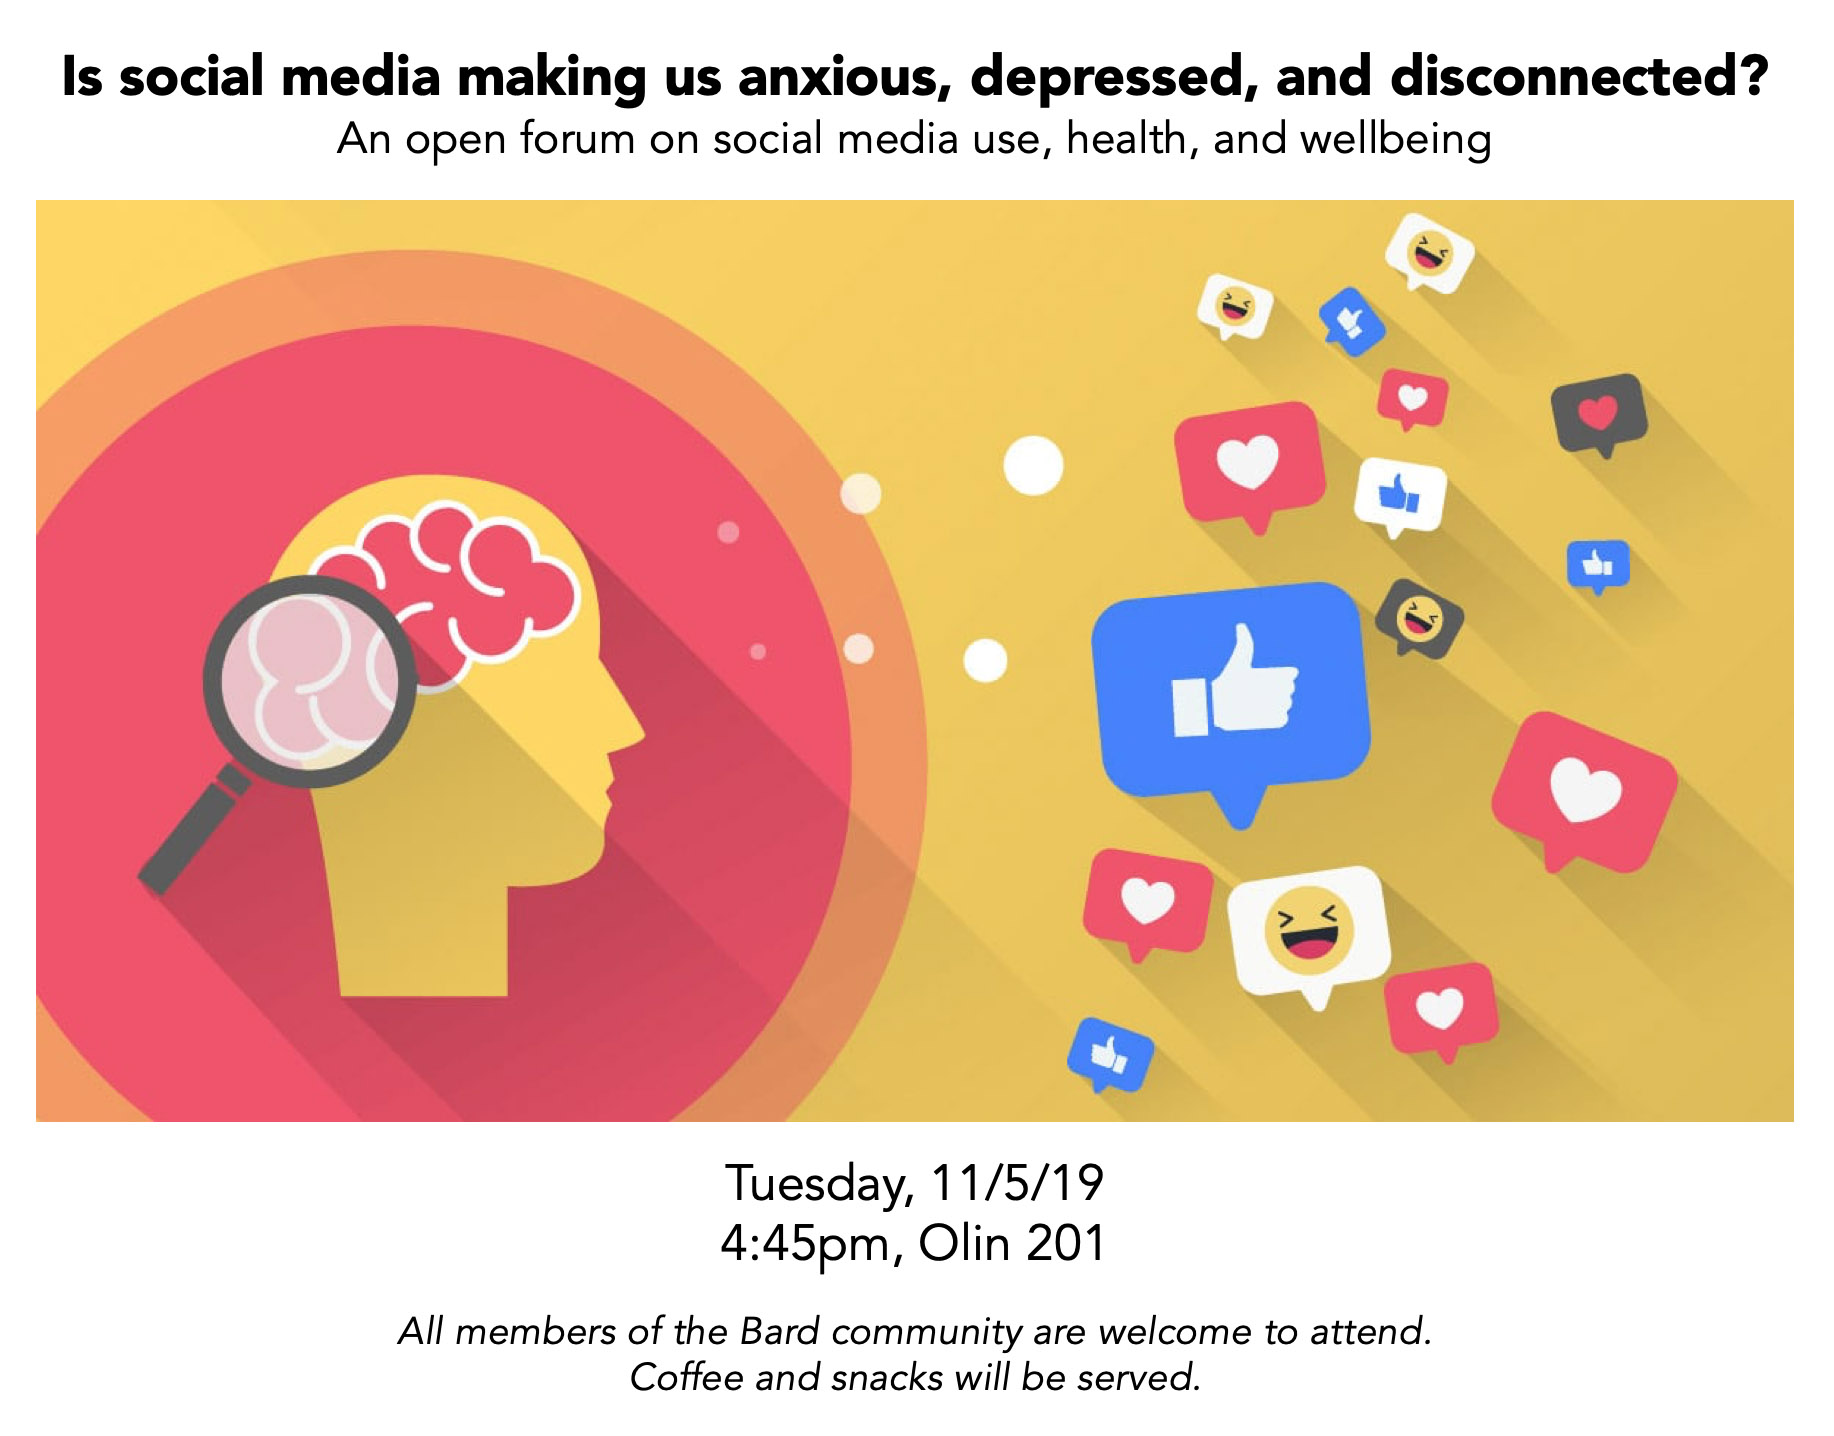 Is social media making us anxious, depressed, and disconnected?